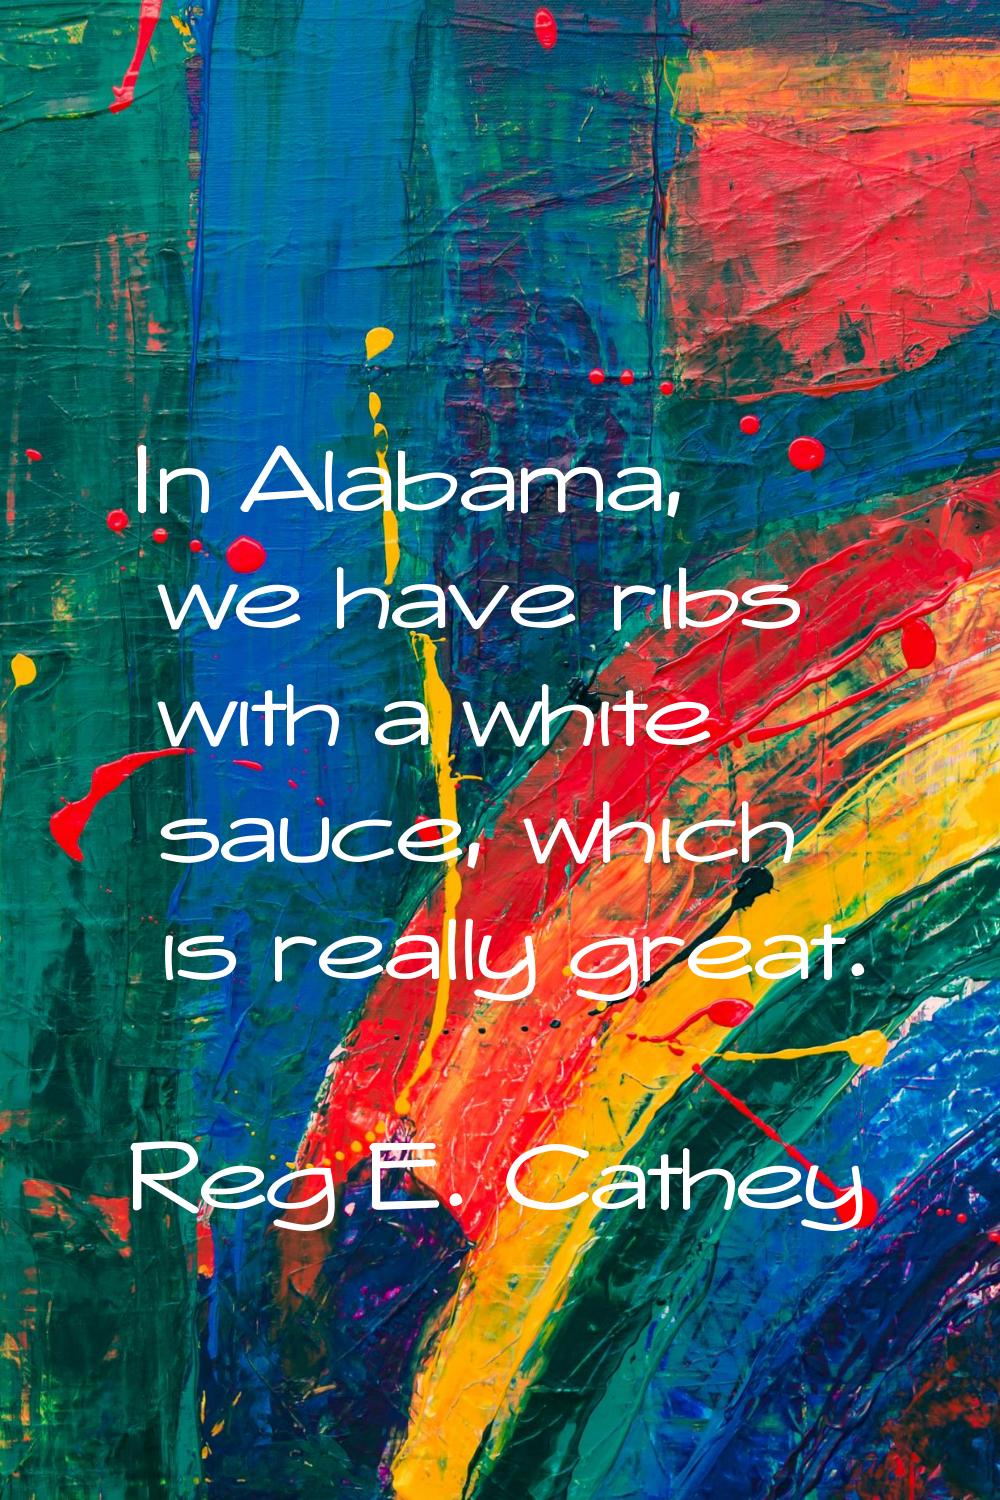 In Alabama, we have ribs with a white sauce, which is really great.